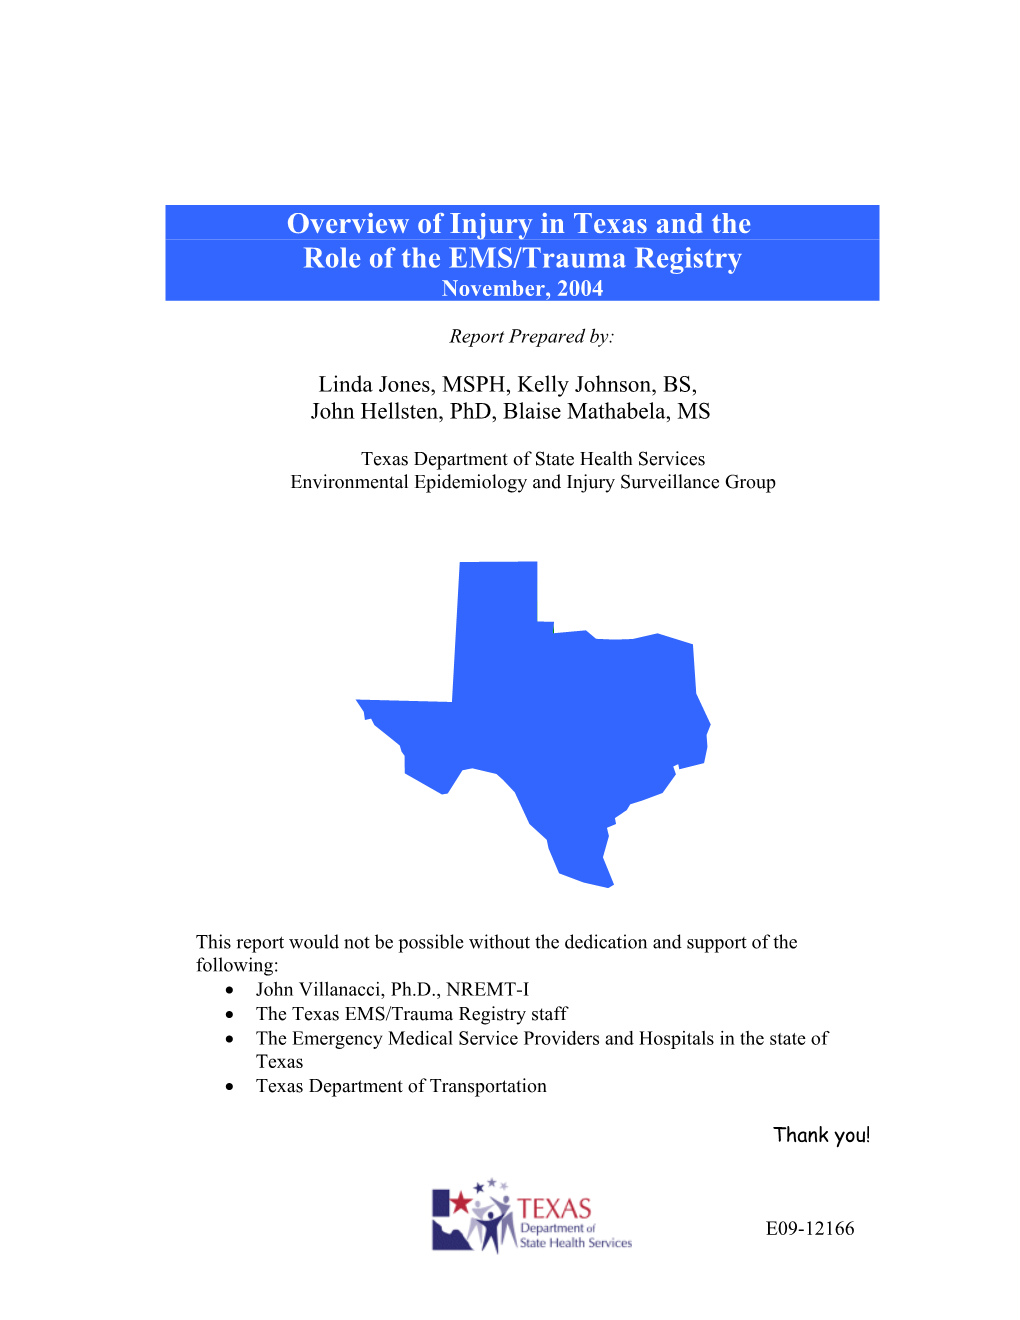 Overview of Injury in Texas and The